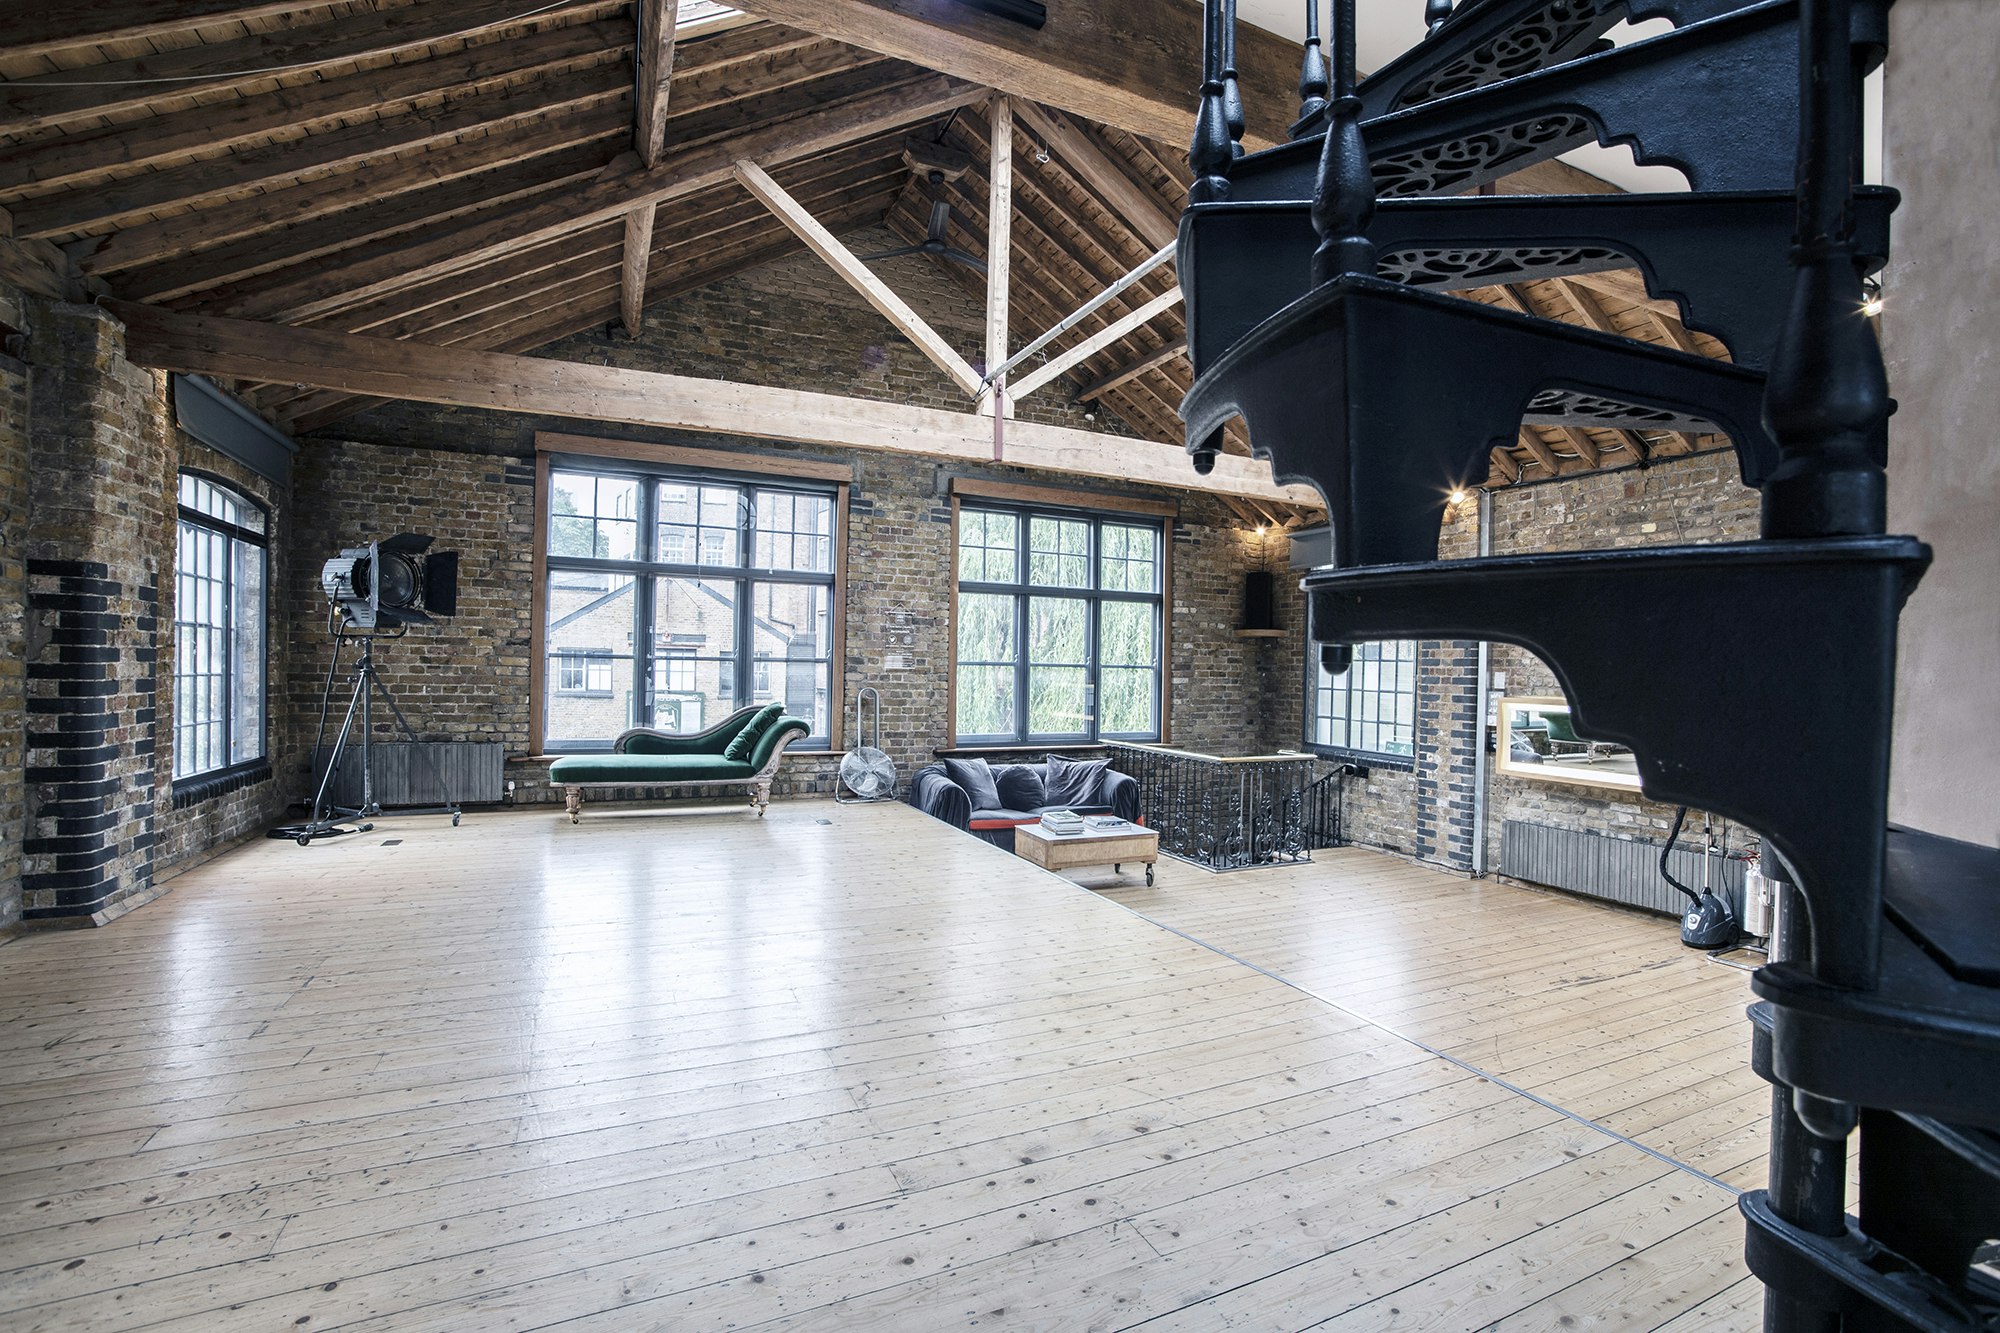 Filming Locations Venues in South London - First Option Location Studio